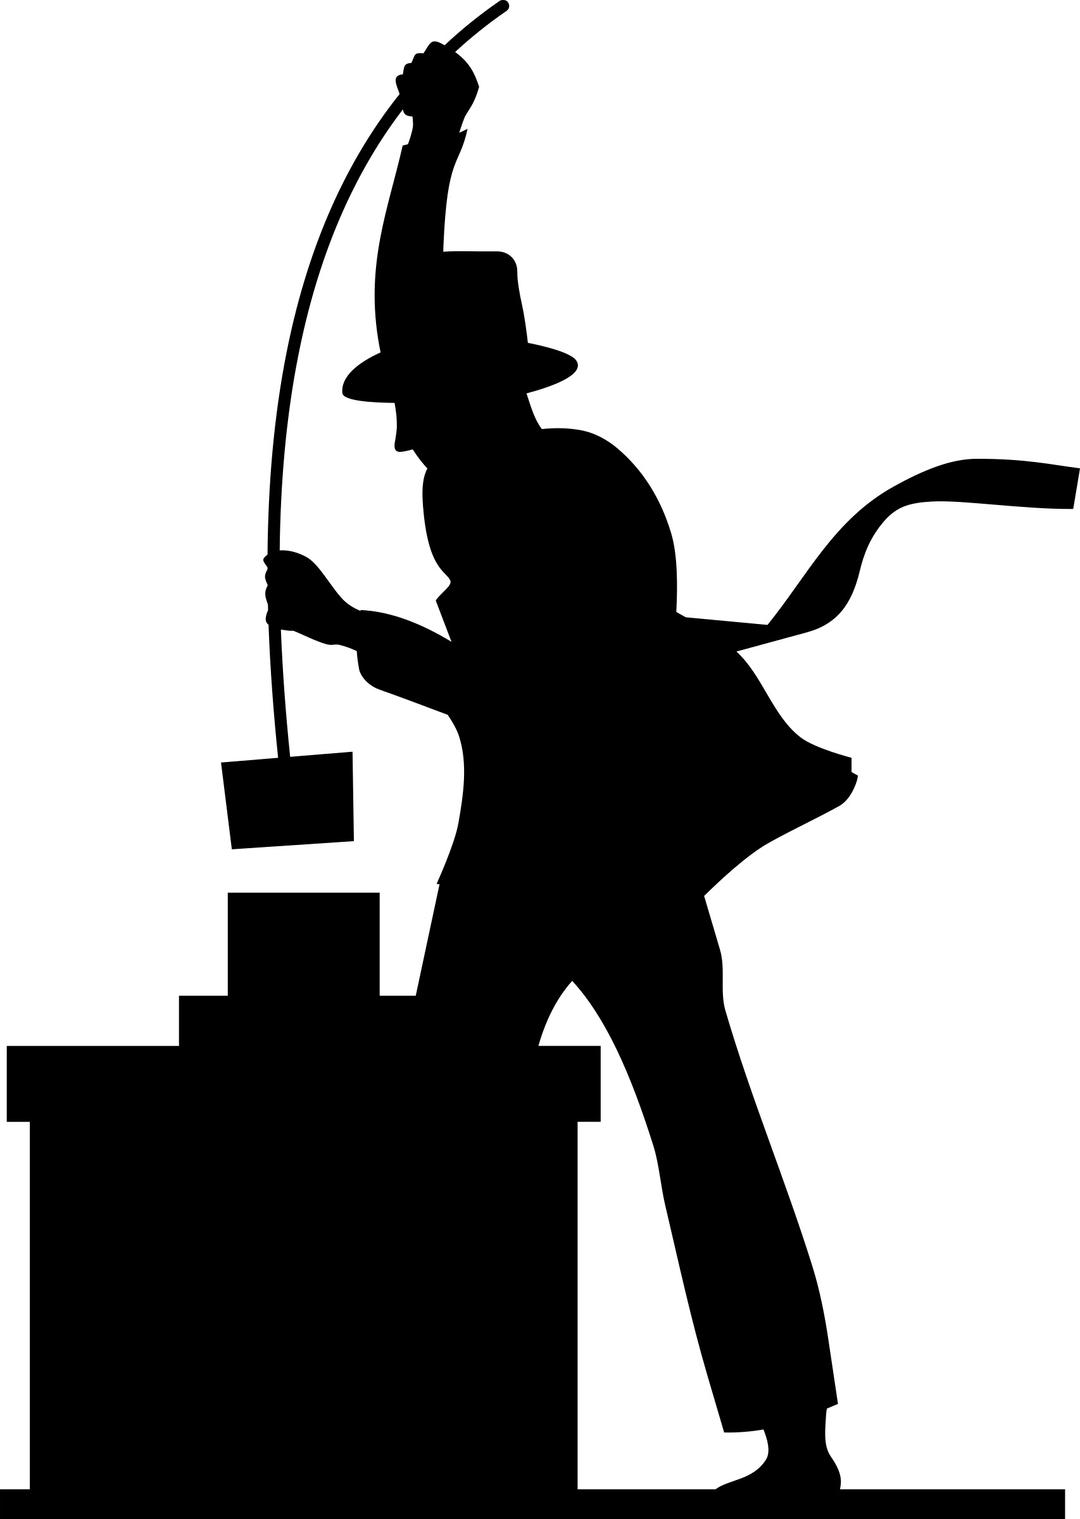 Chimney Sweeper Silhouette png transparent